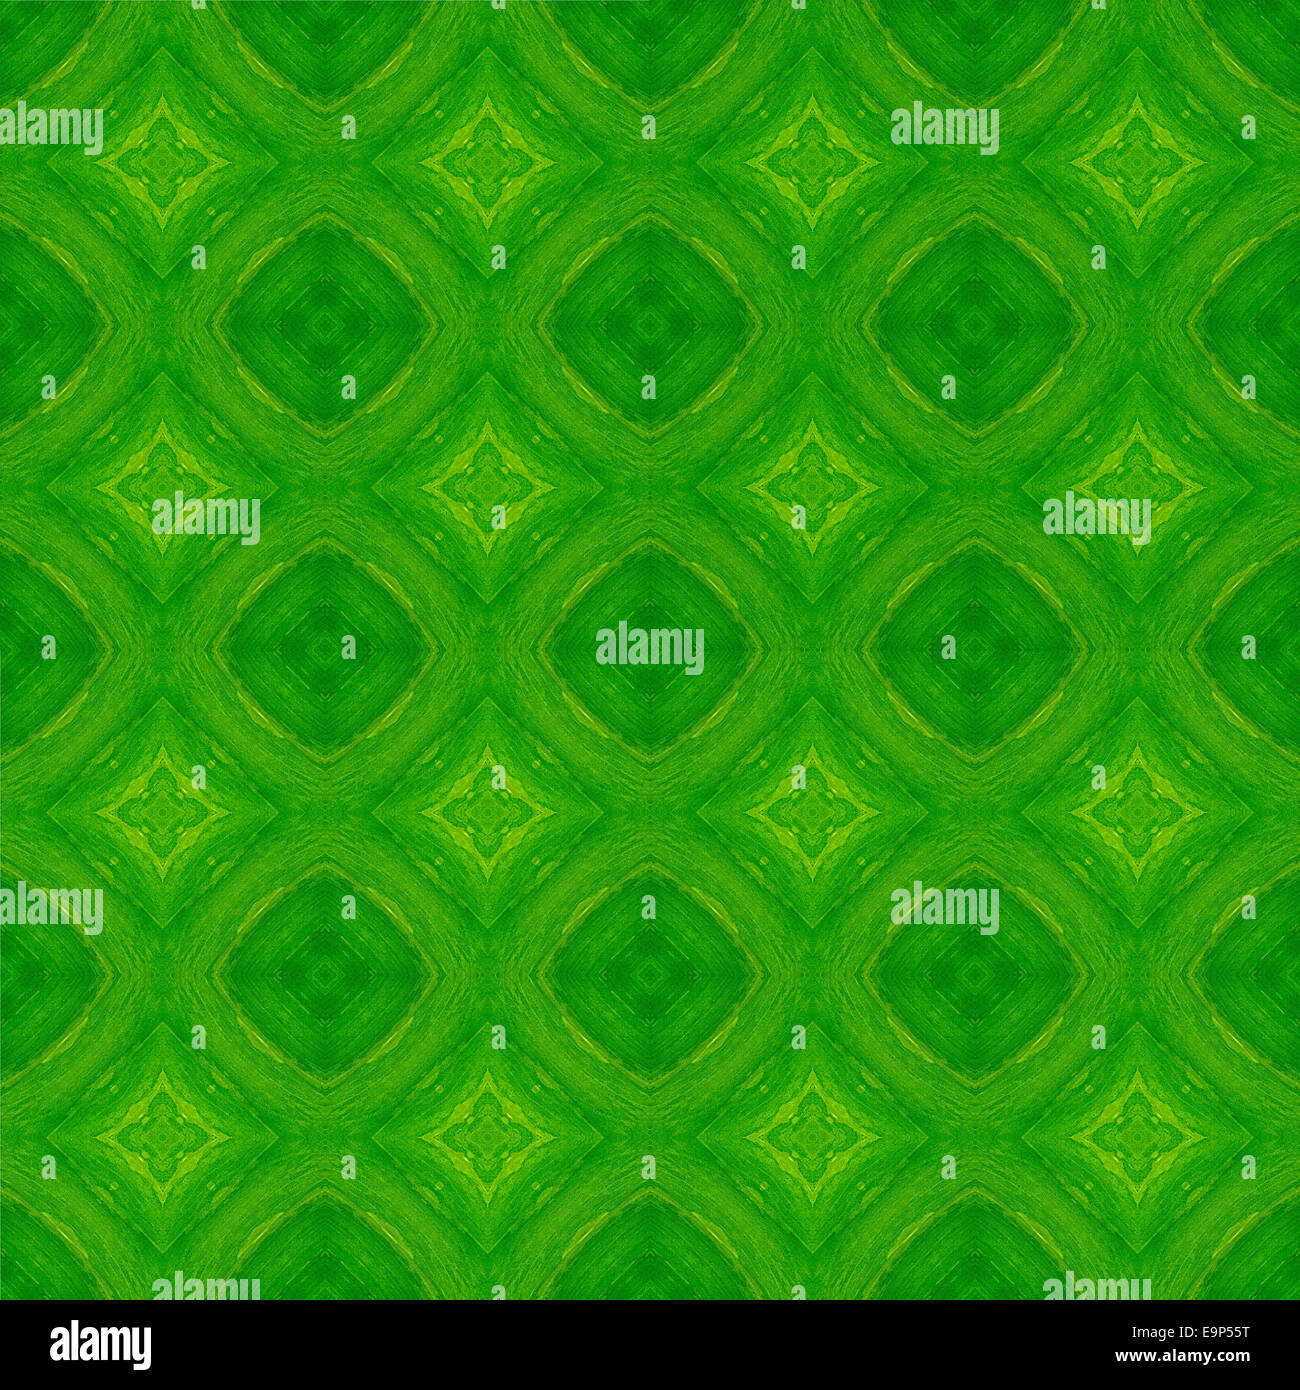 Seamless pattern made from leaf background texture Stock Photo